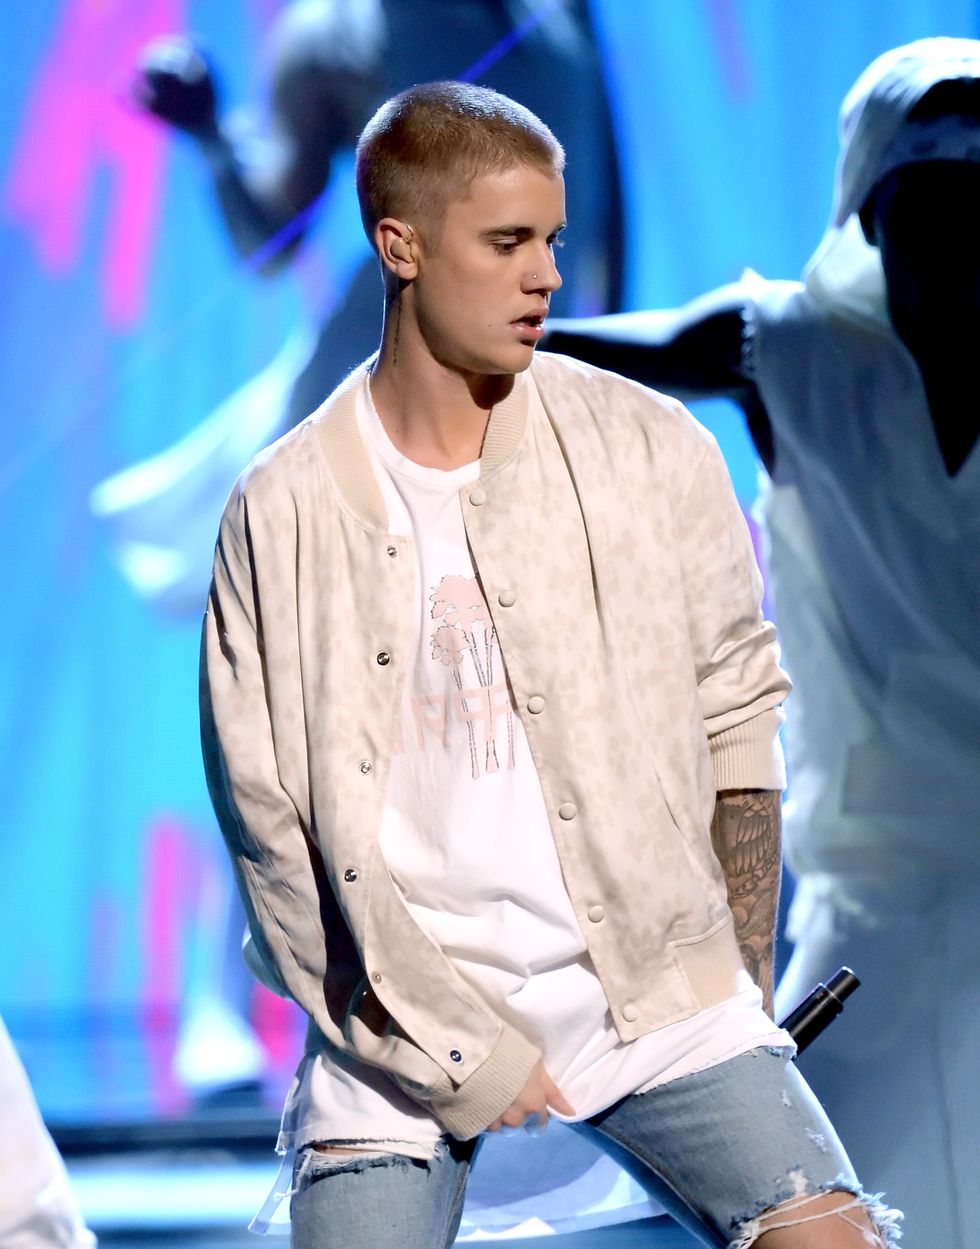 Justin Bieber Sings and "Sorry" at the 2016 Billboard Music Awards